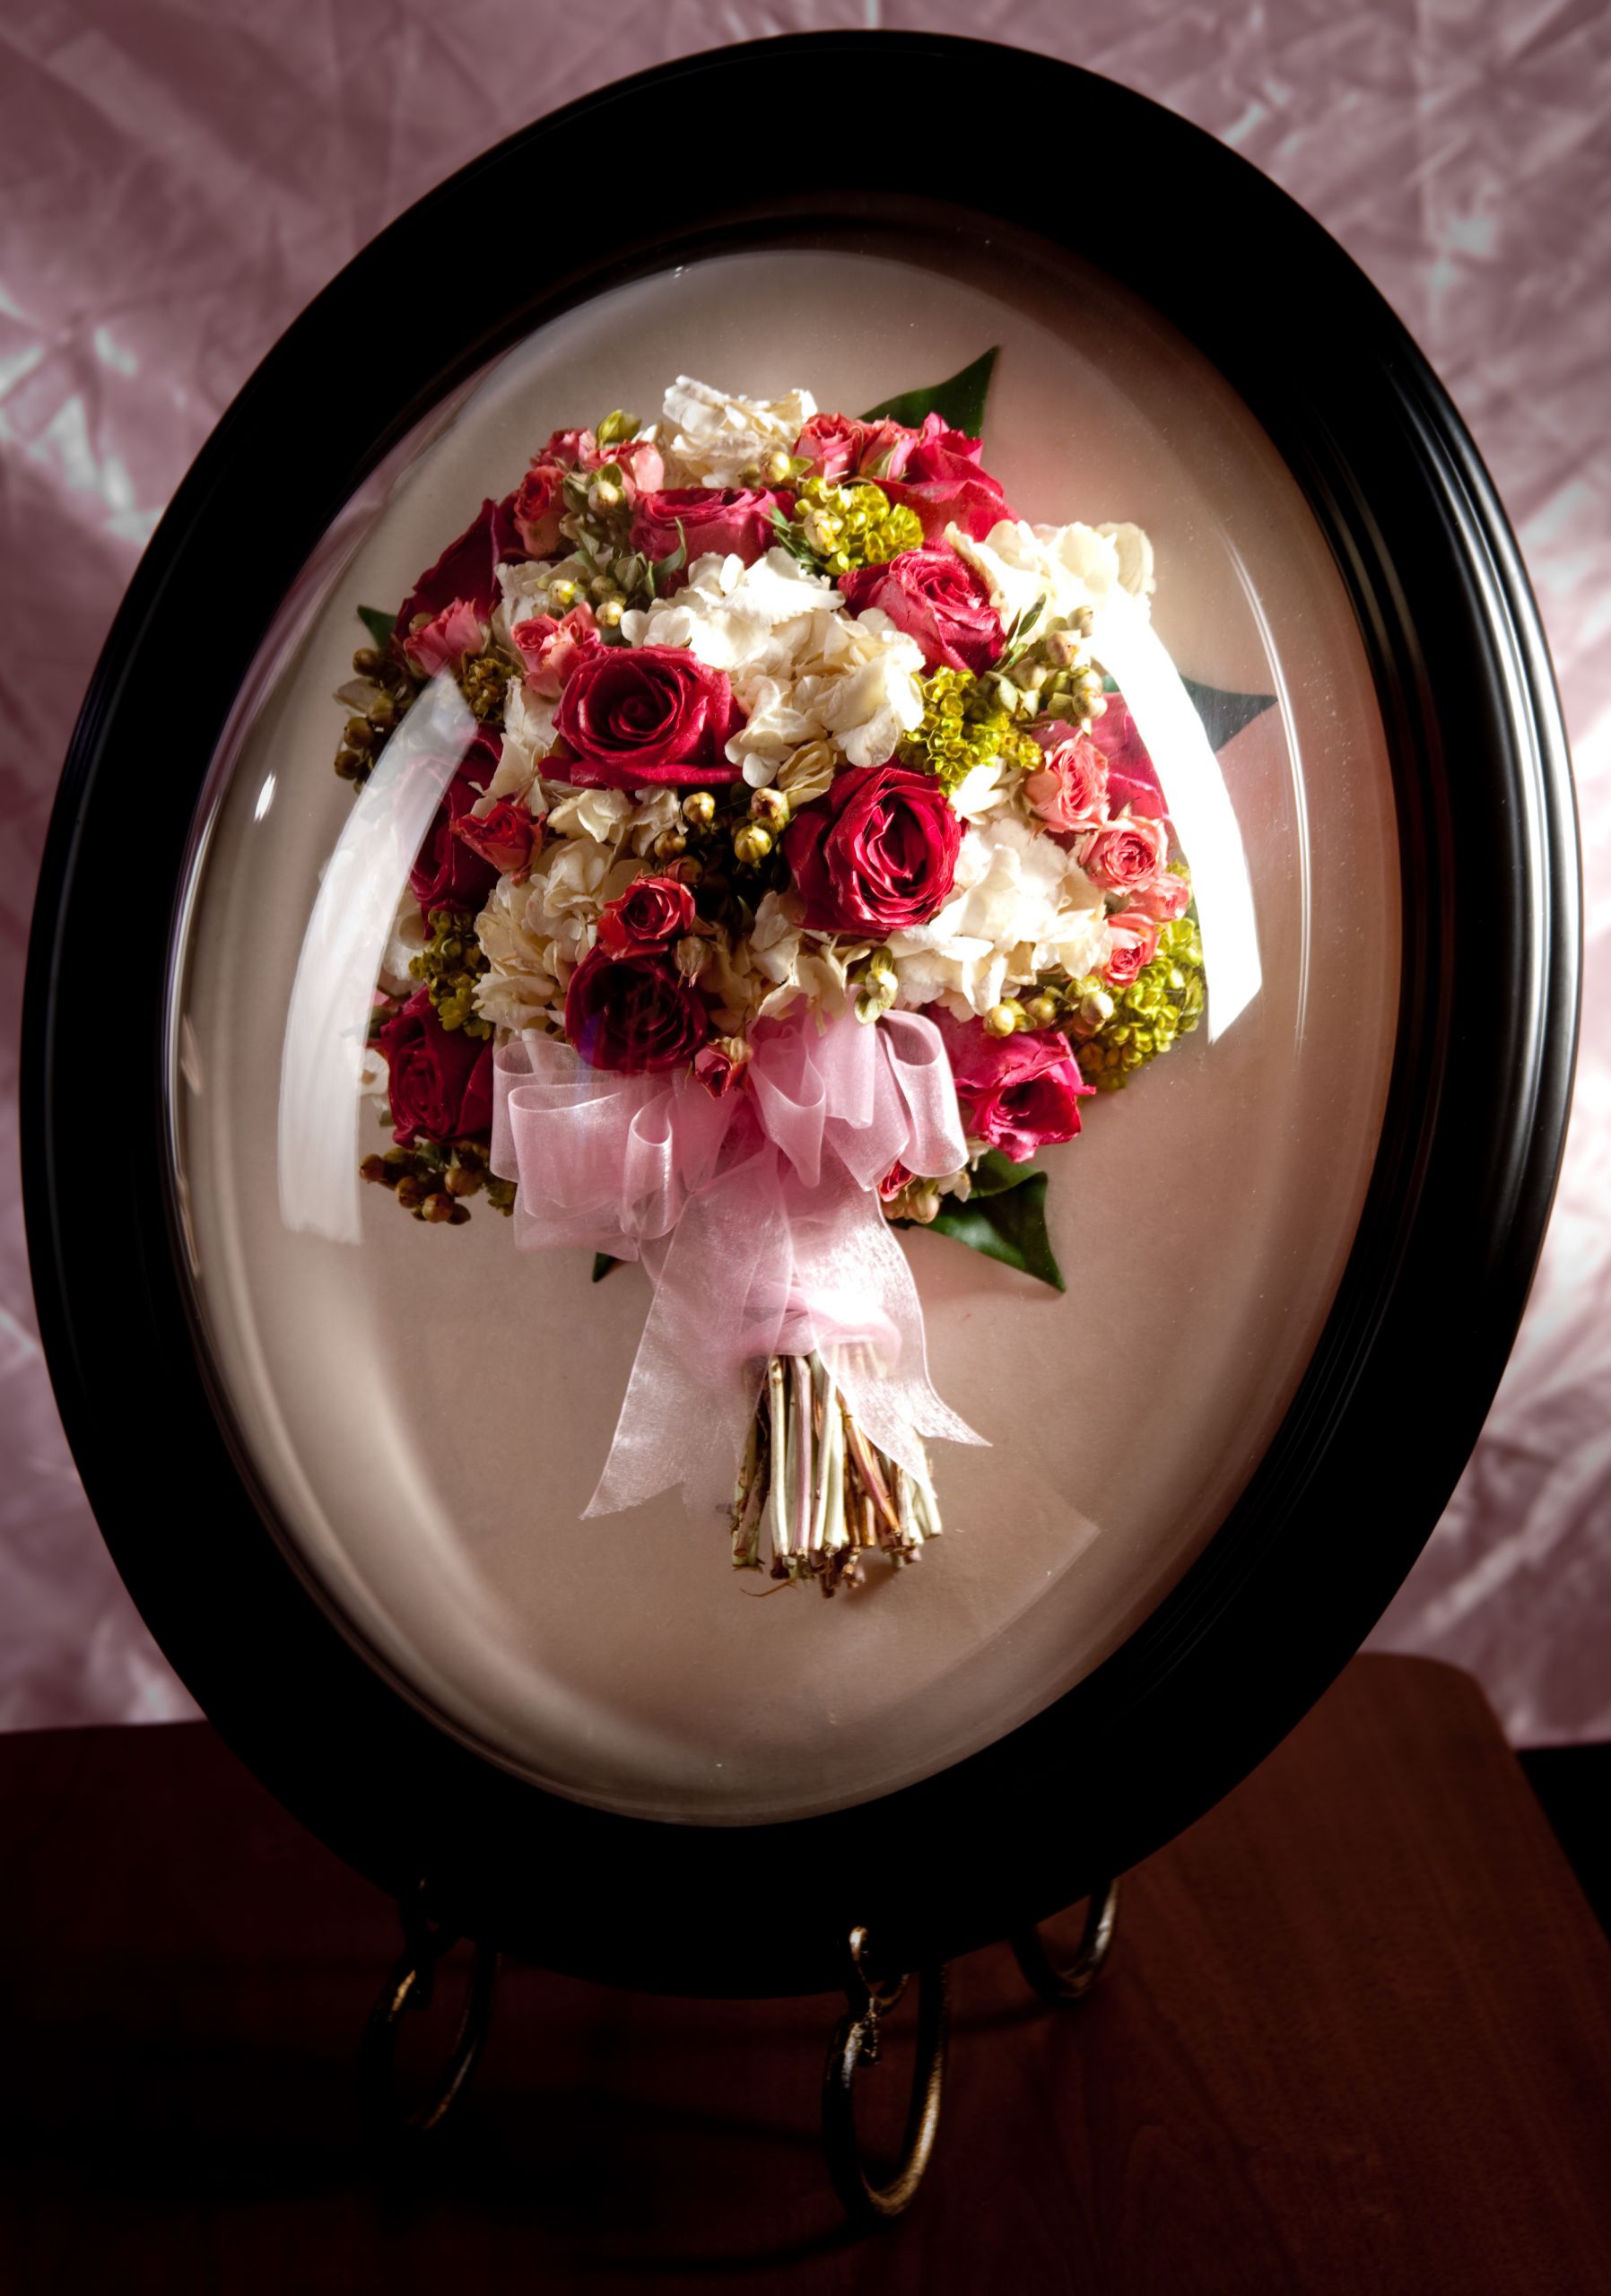 How To Preserve Wedding Flowers
 How To Preserve Your Wedding Bouquet For A Lifetime